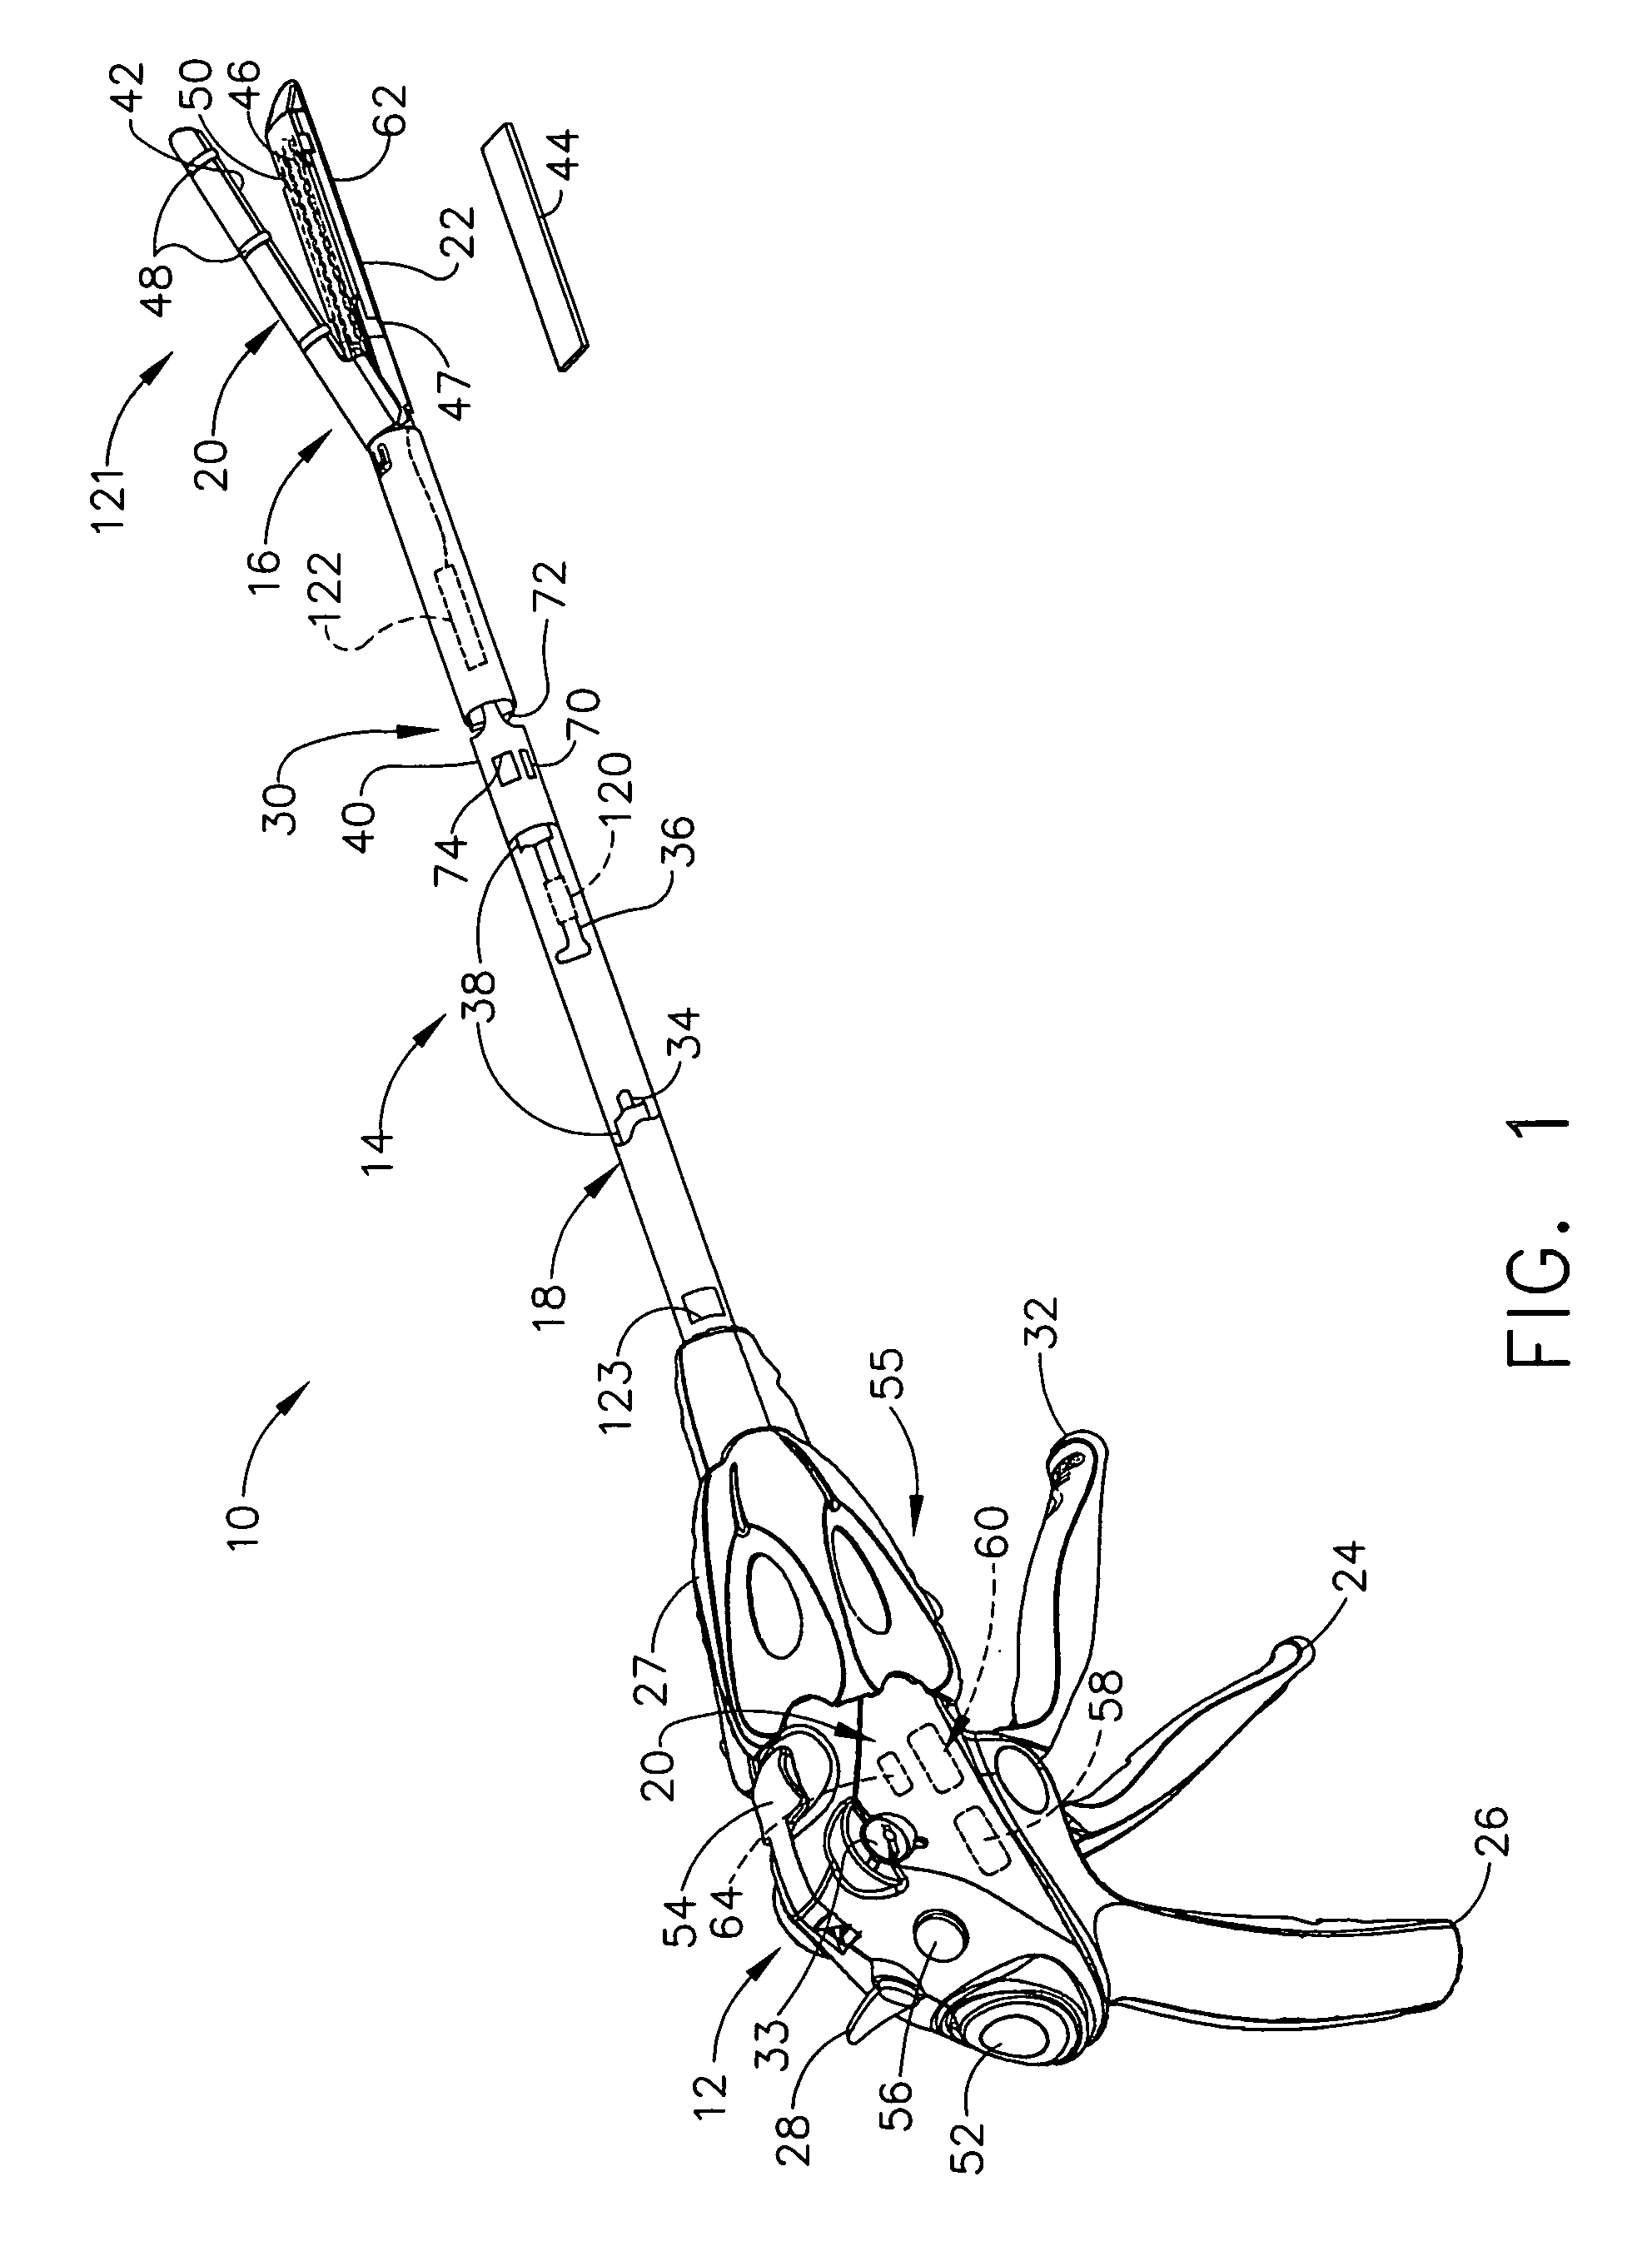 Surgical stapling instrument having load sensing control circuitry